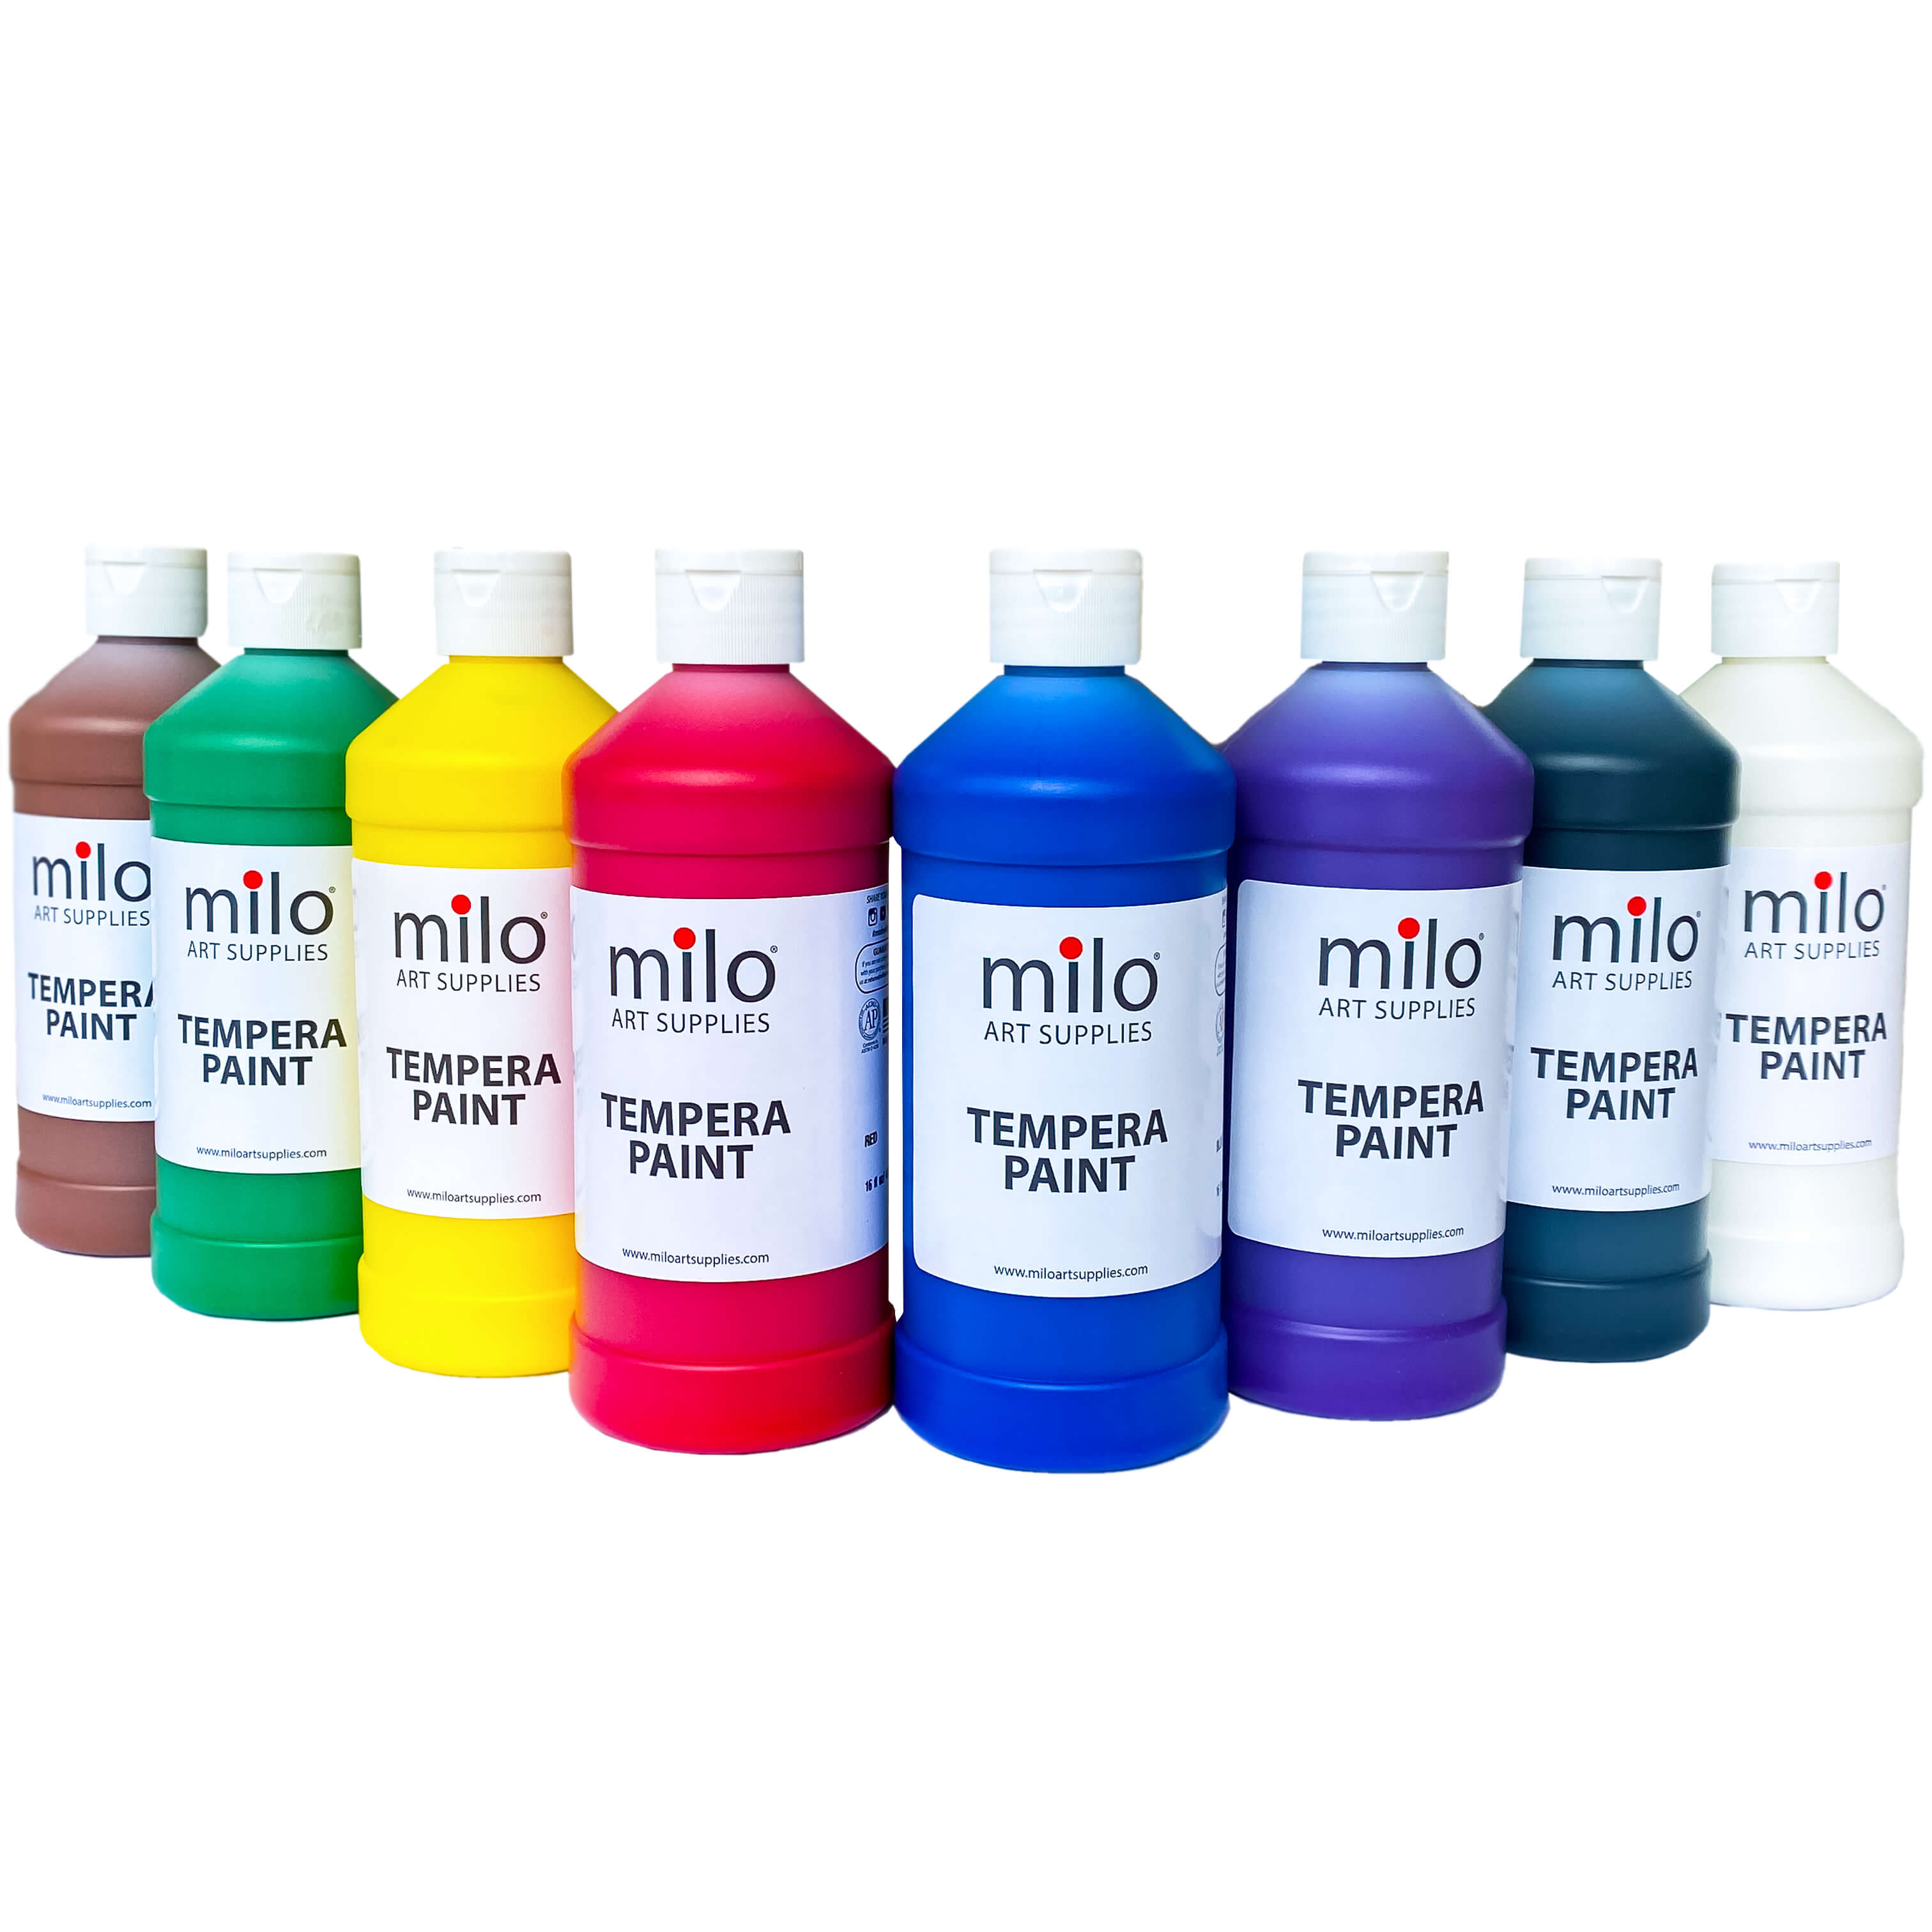 Tempera Paint, Multicultural, 8 oz, Set of 8 - RPC882056